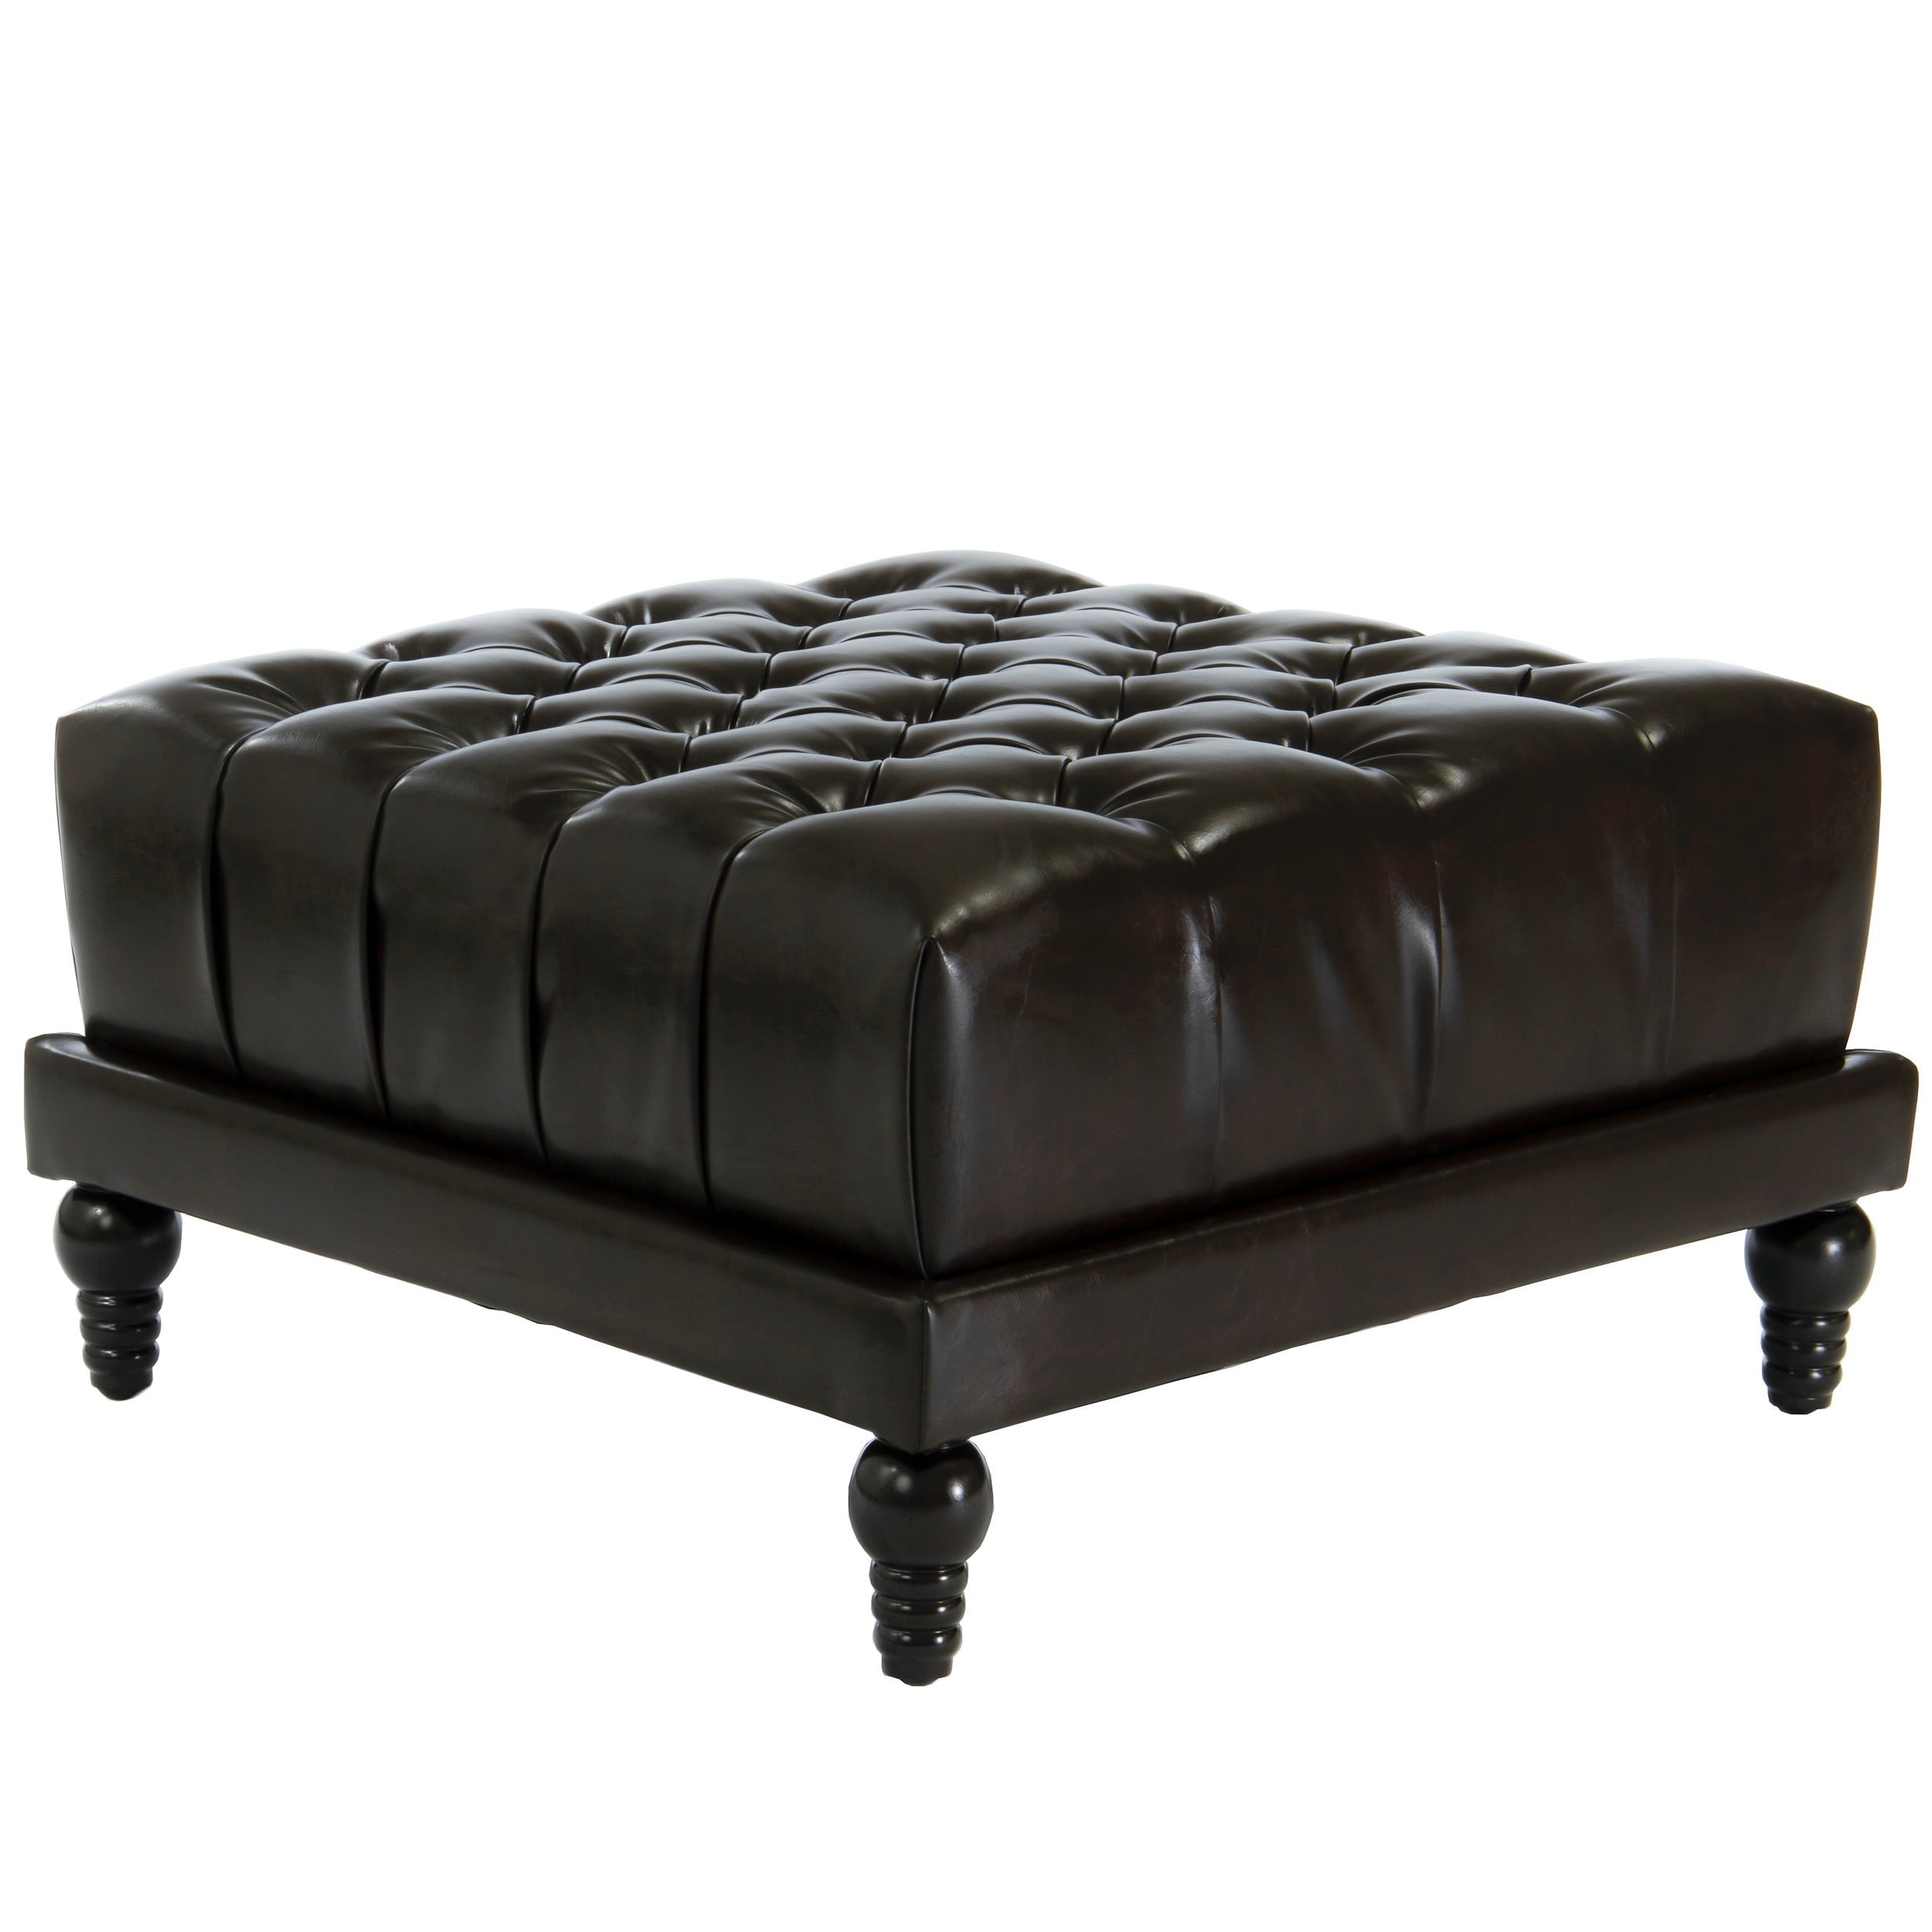 Darwin Tufted Brown Bonded Leather Ottoman